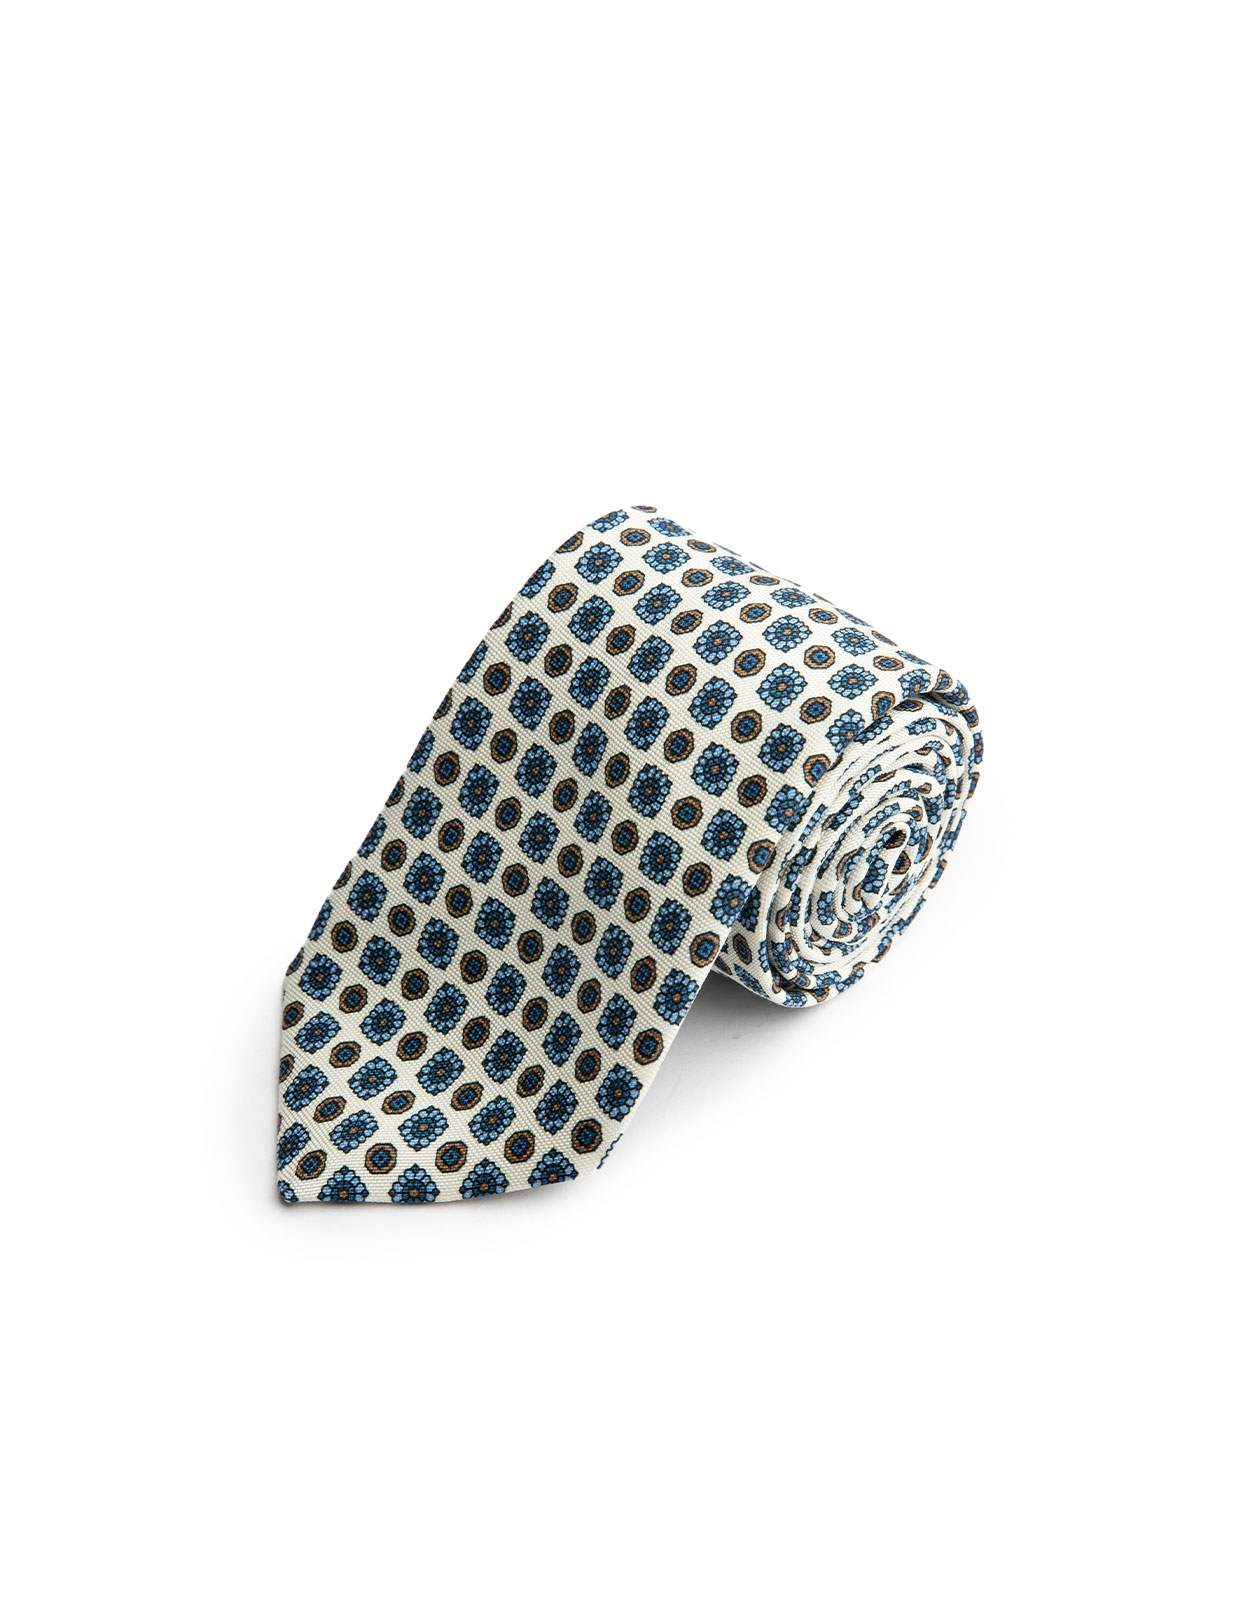 Printed Silk Tie Lined White/Blue Flowers